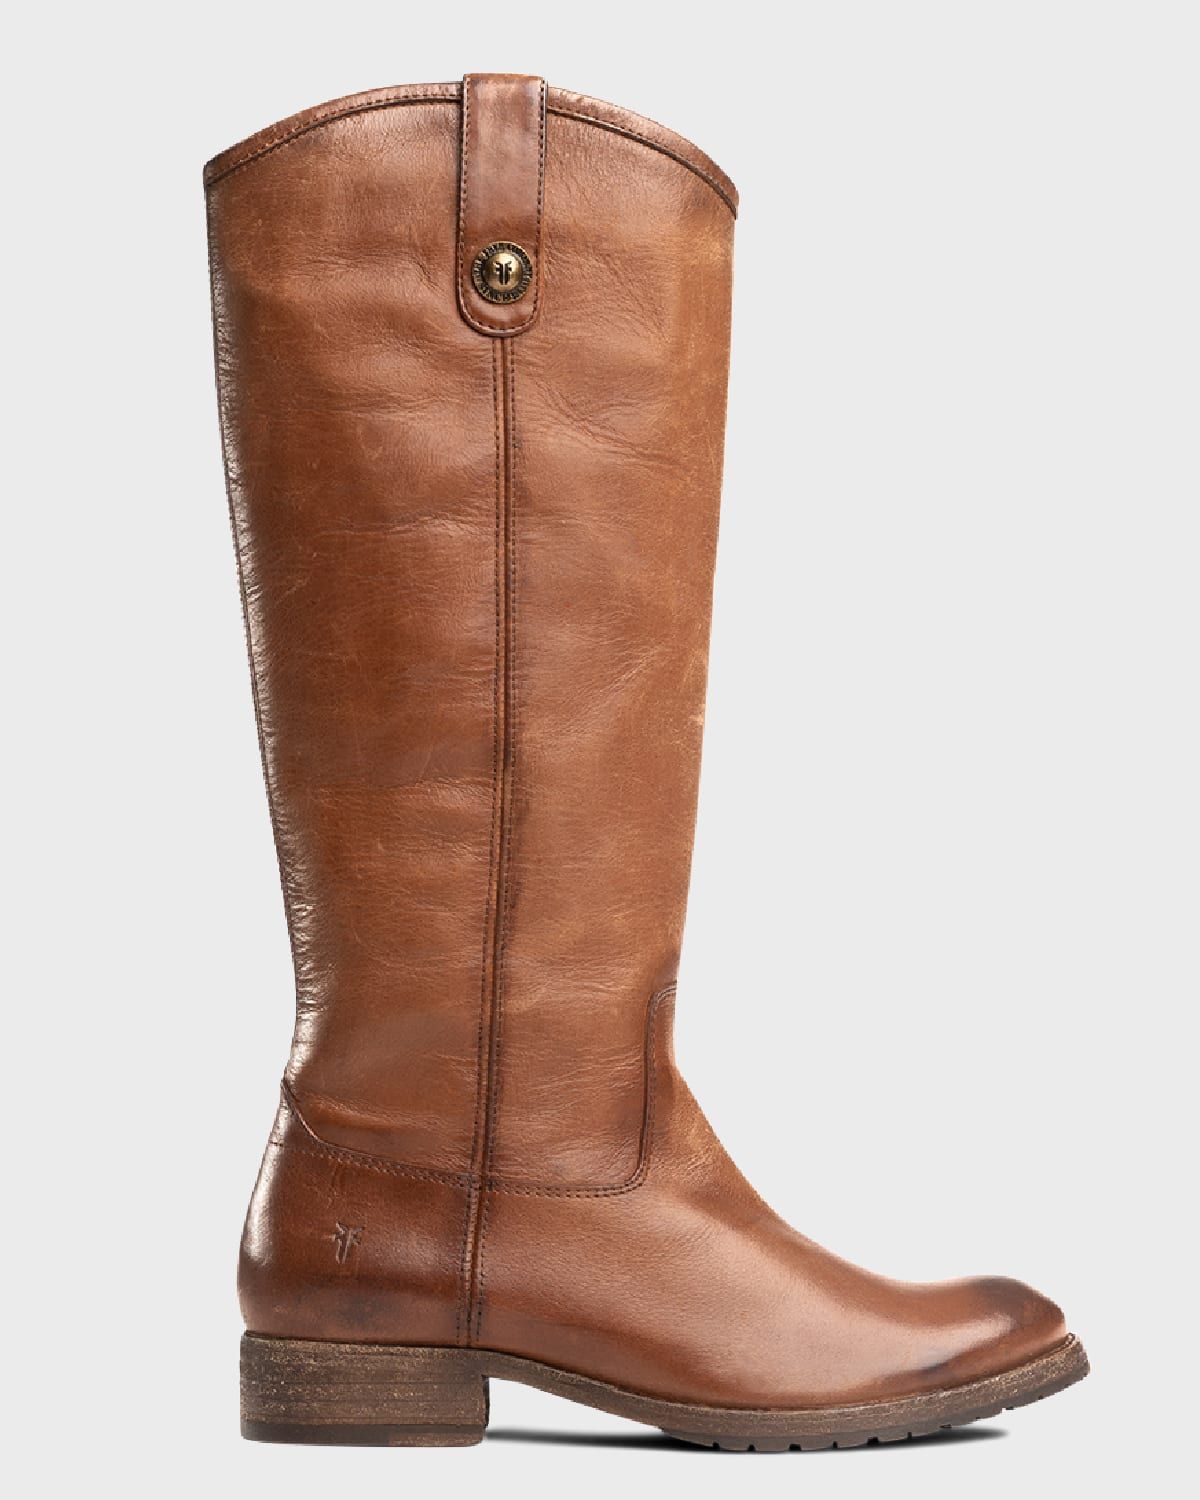 Melissa Button Lug-Sole Tall Riding Boots | Neiman Marcus